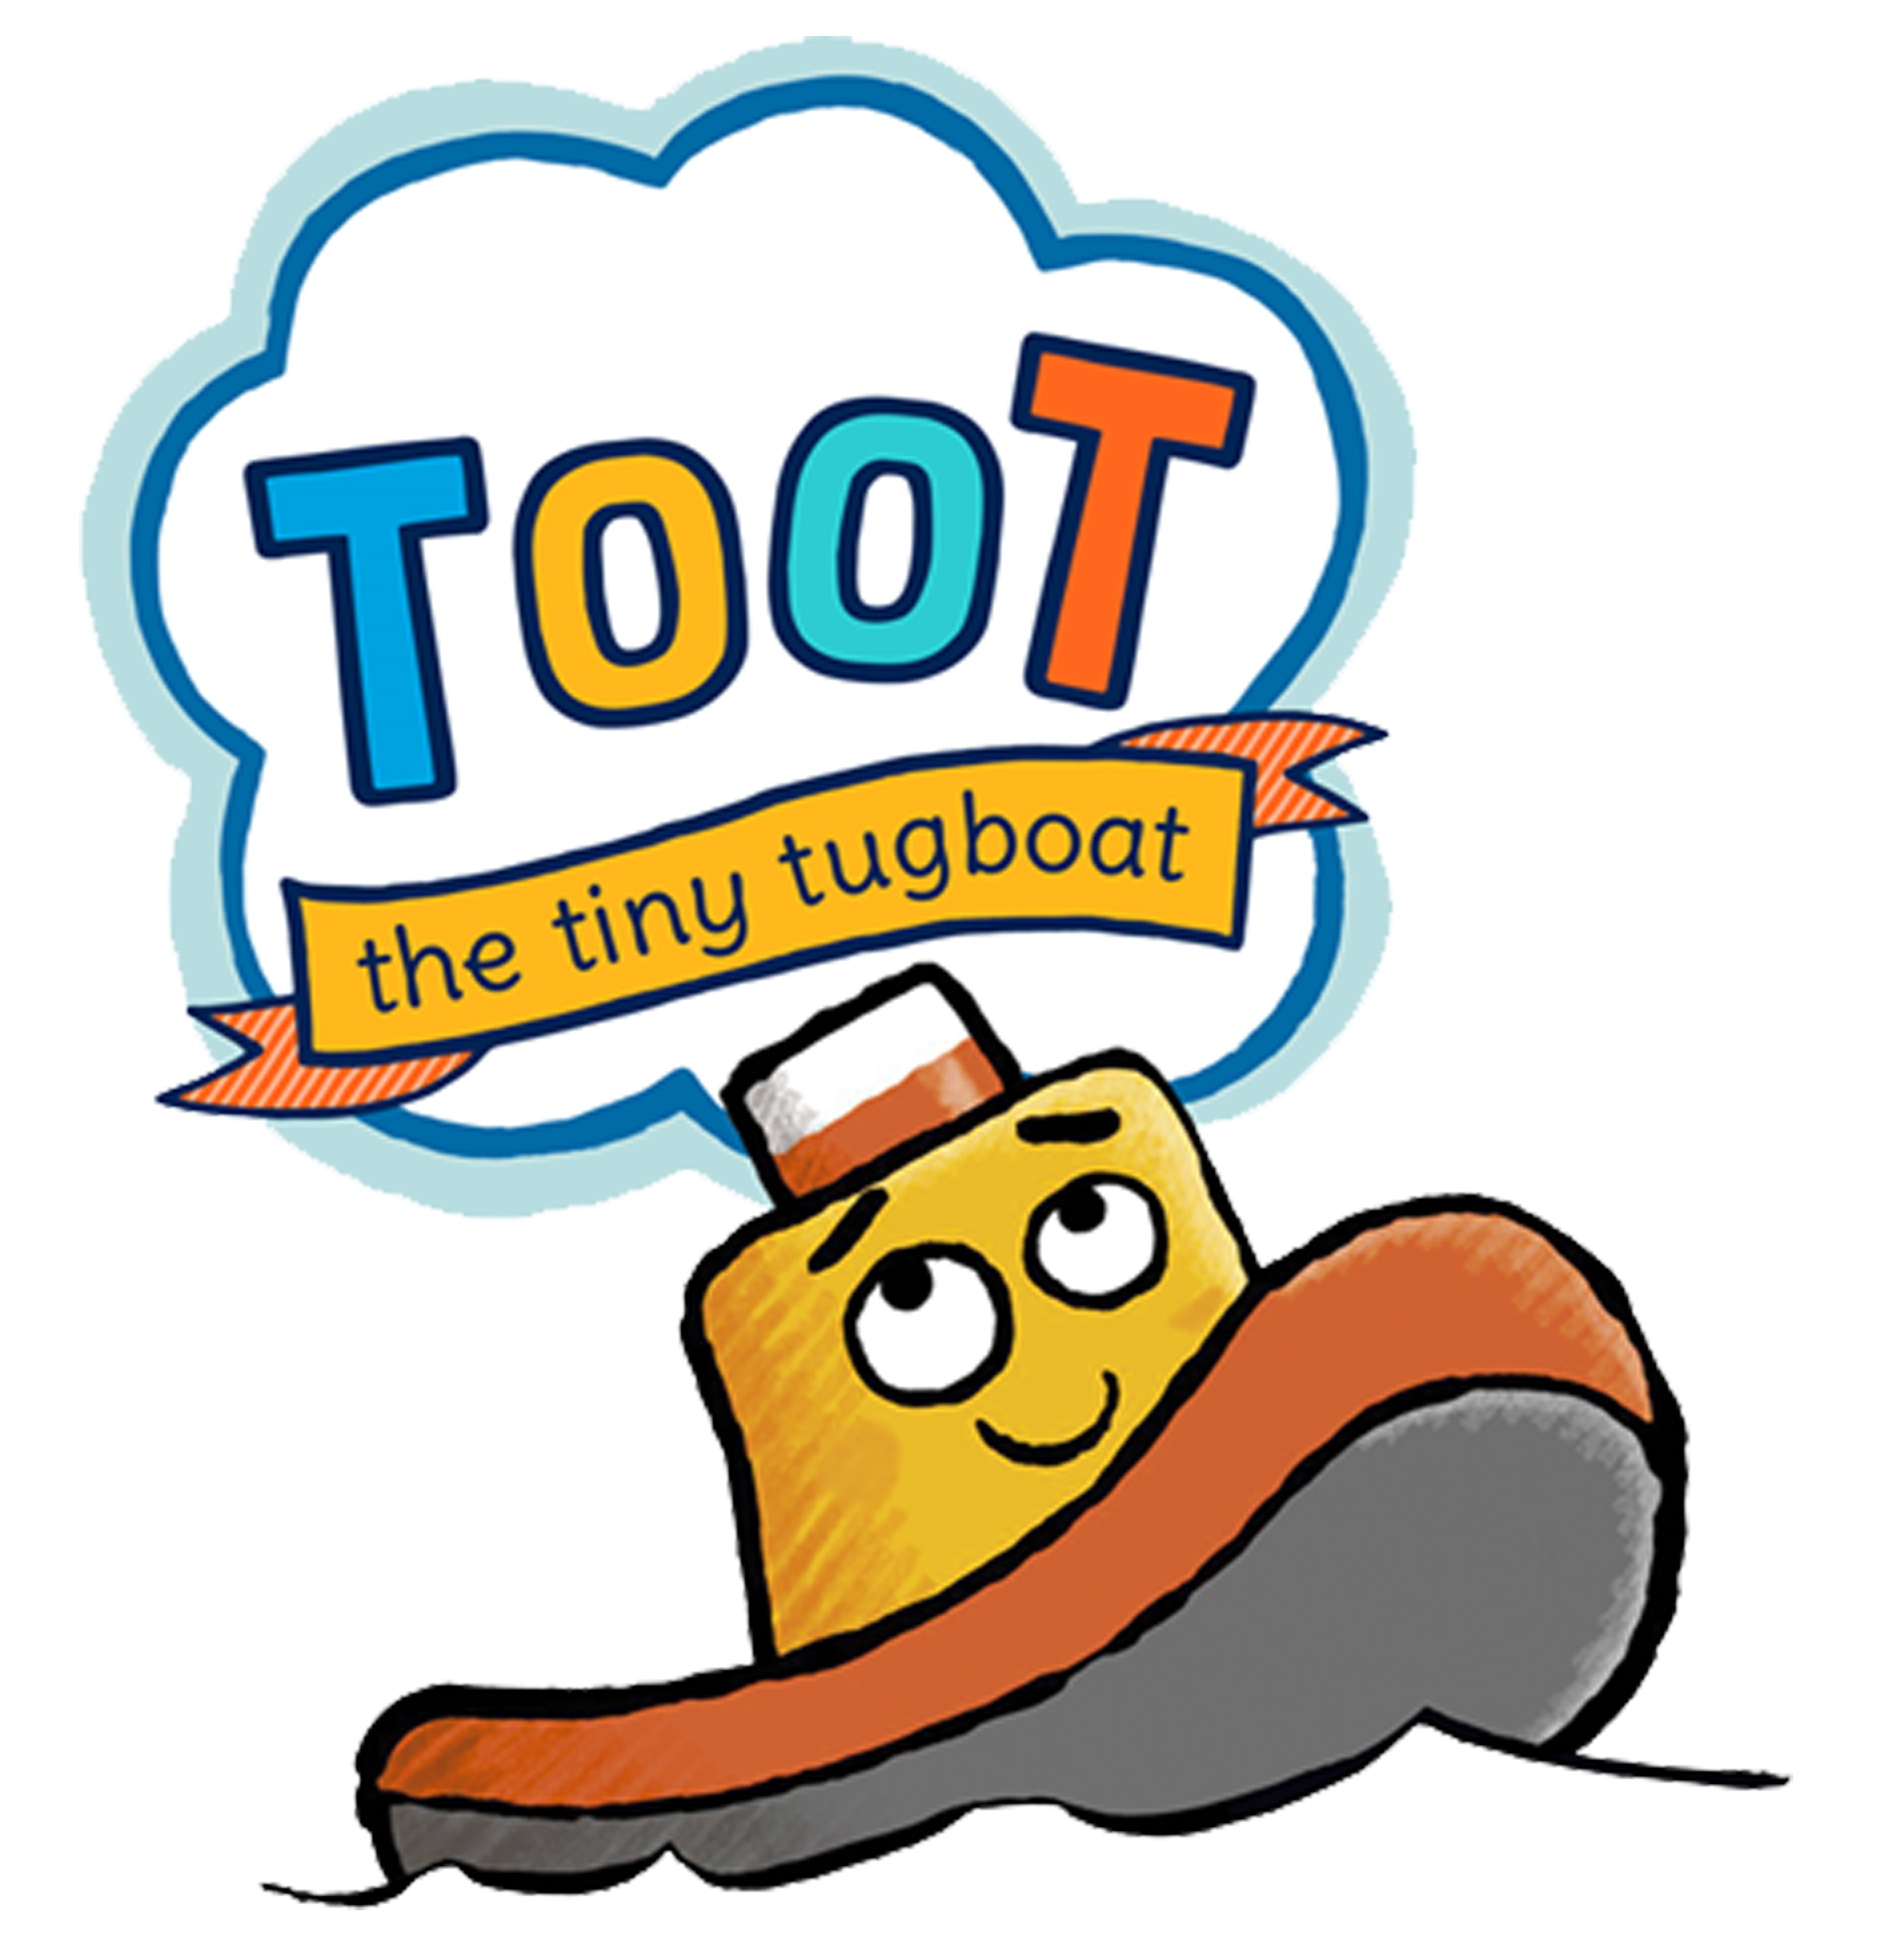 Toot the Tiny Tugboat Next Episode Air Date & Count